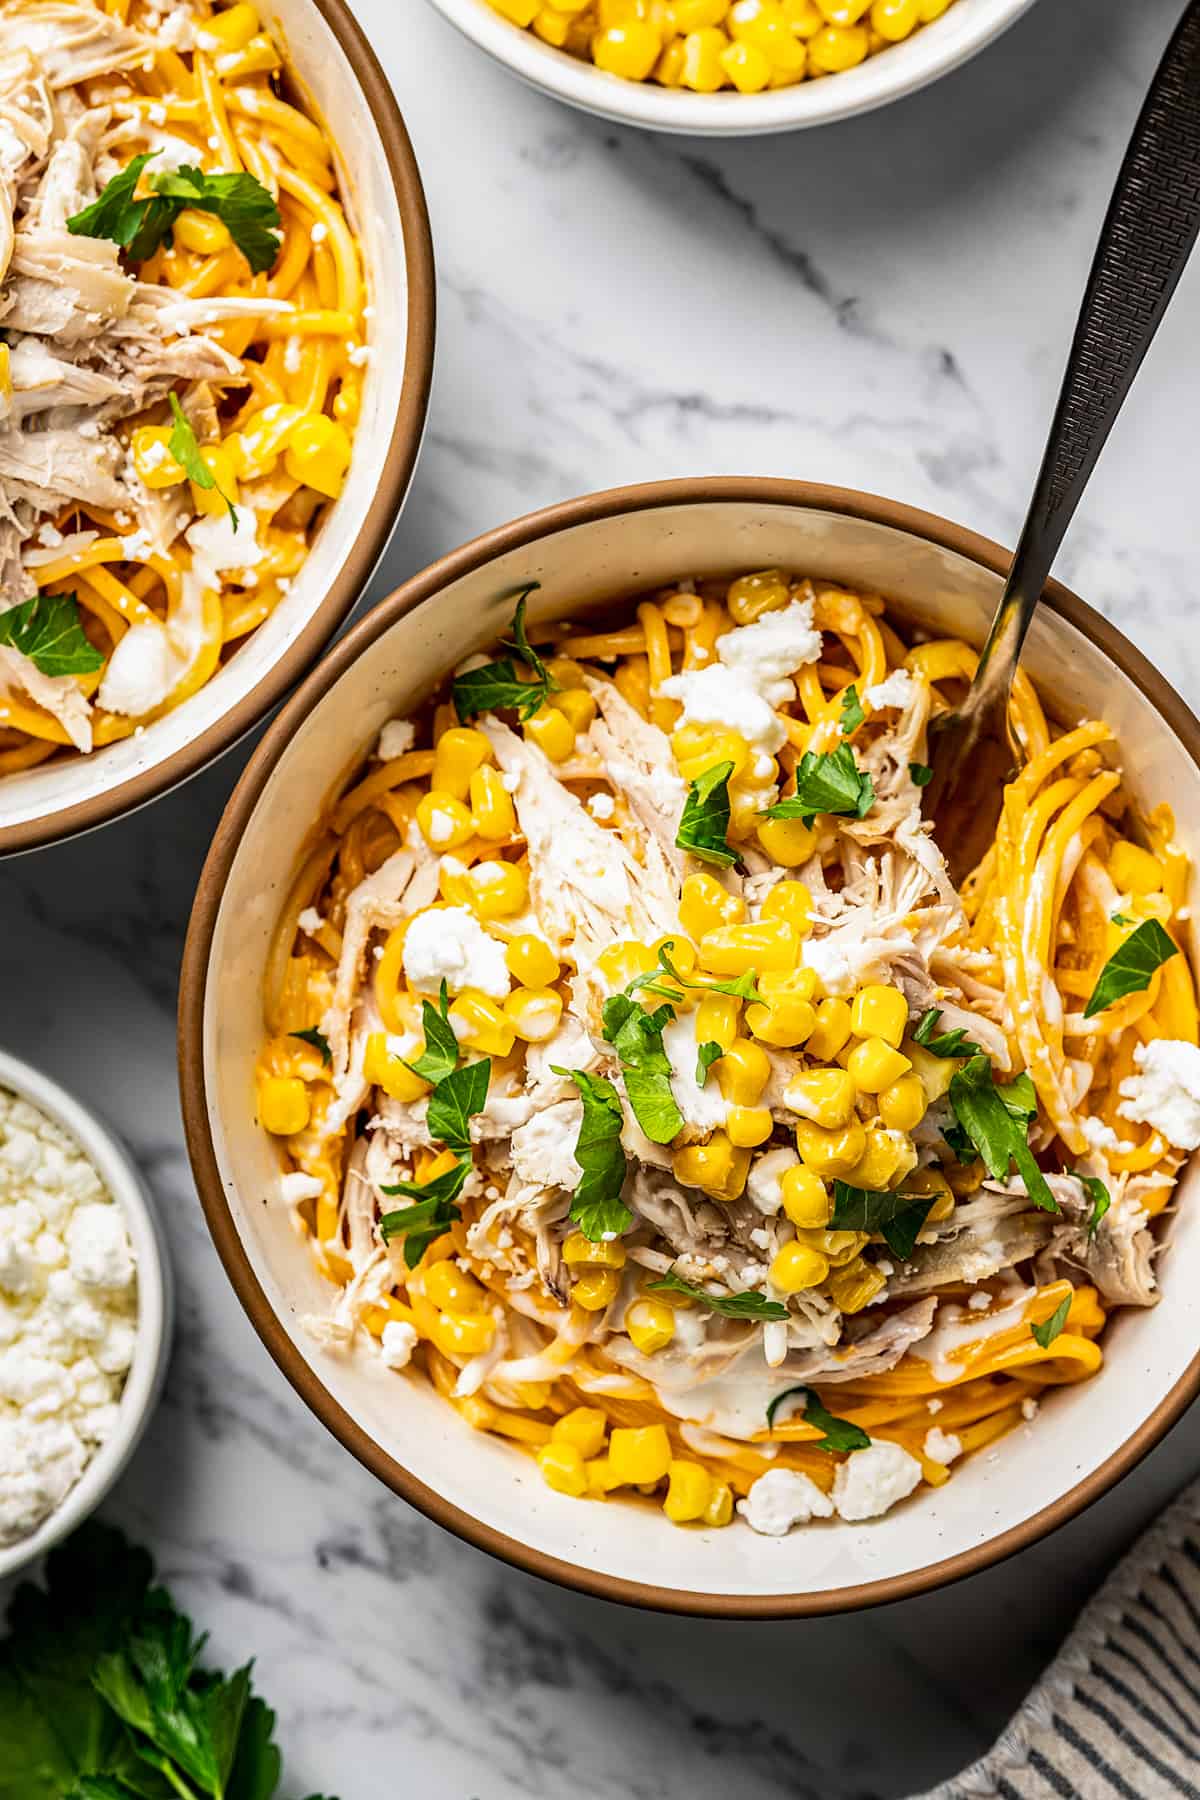 Buffalo chicken pasta in a bowl with a fork near feta and corn.